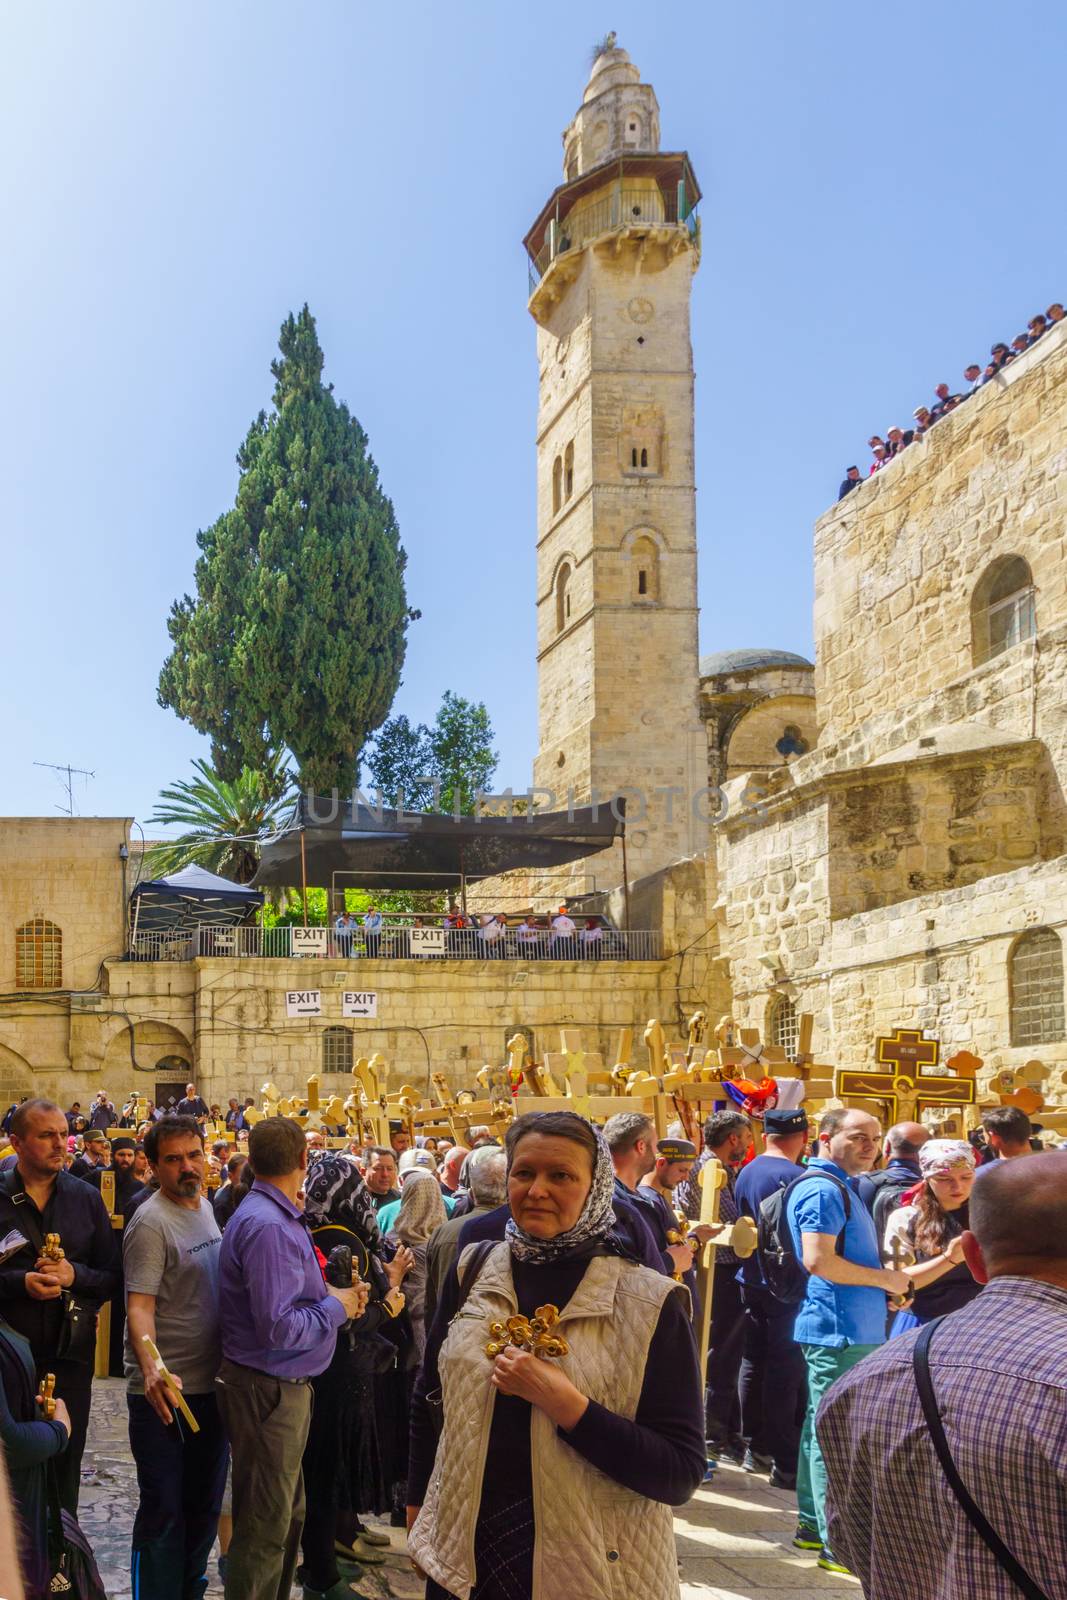 Jerusalem, Israel - April 6, 2018: Orthodox good Friday scene in the entry yard of the church of the holy sepulcher, with pilgrims carrying crosses. The old city of Jerusalem, Israel